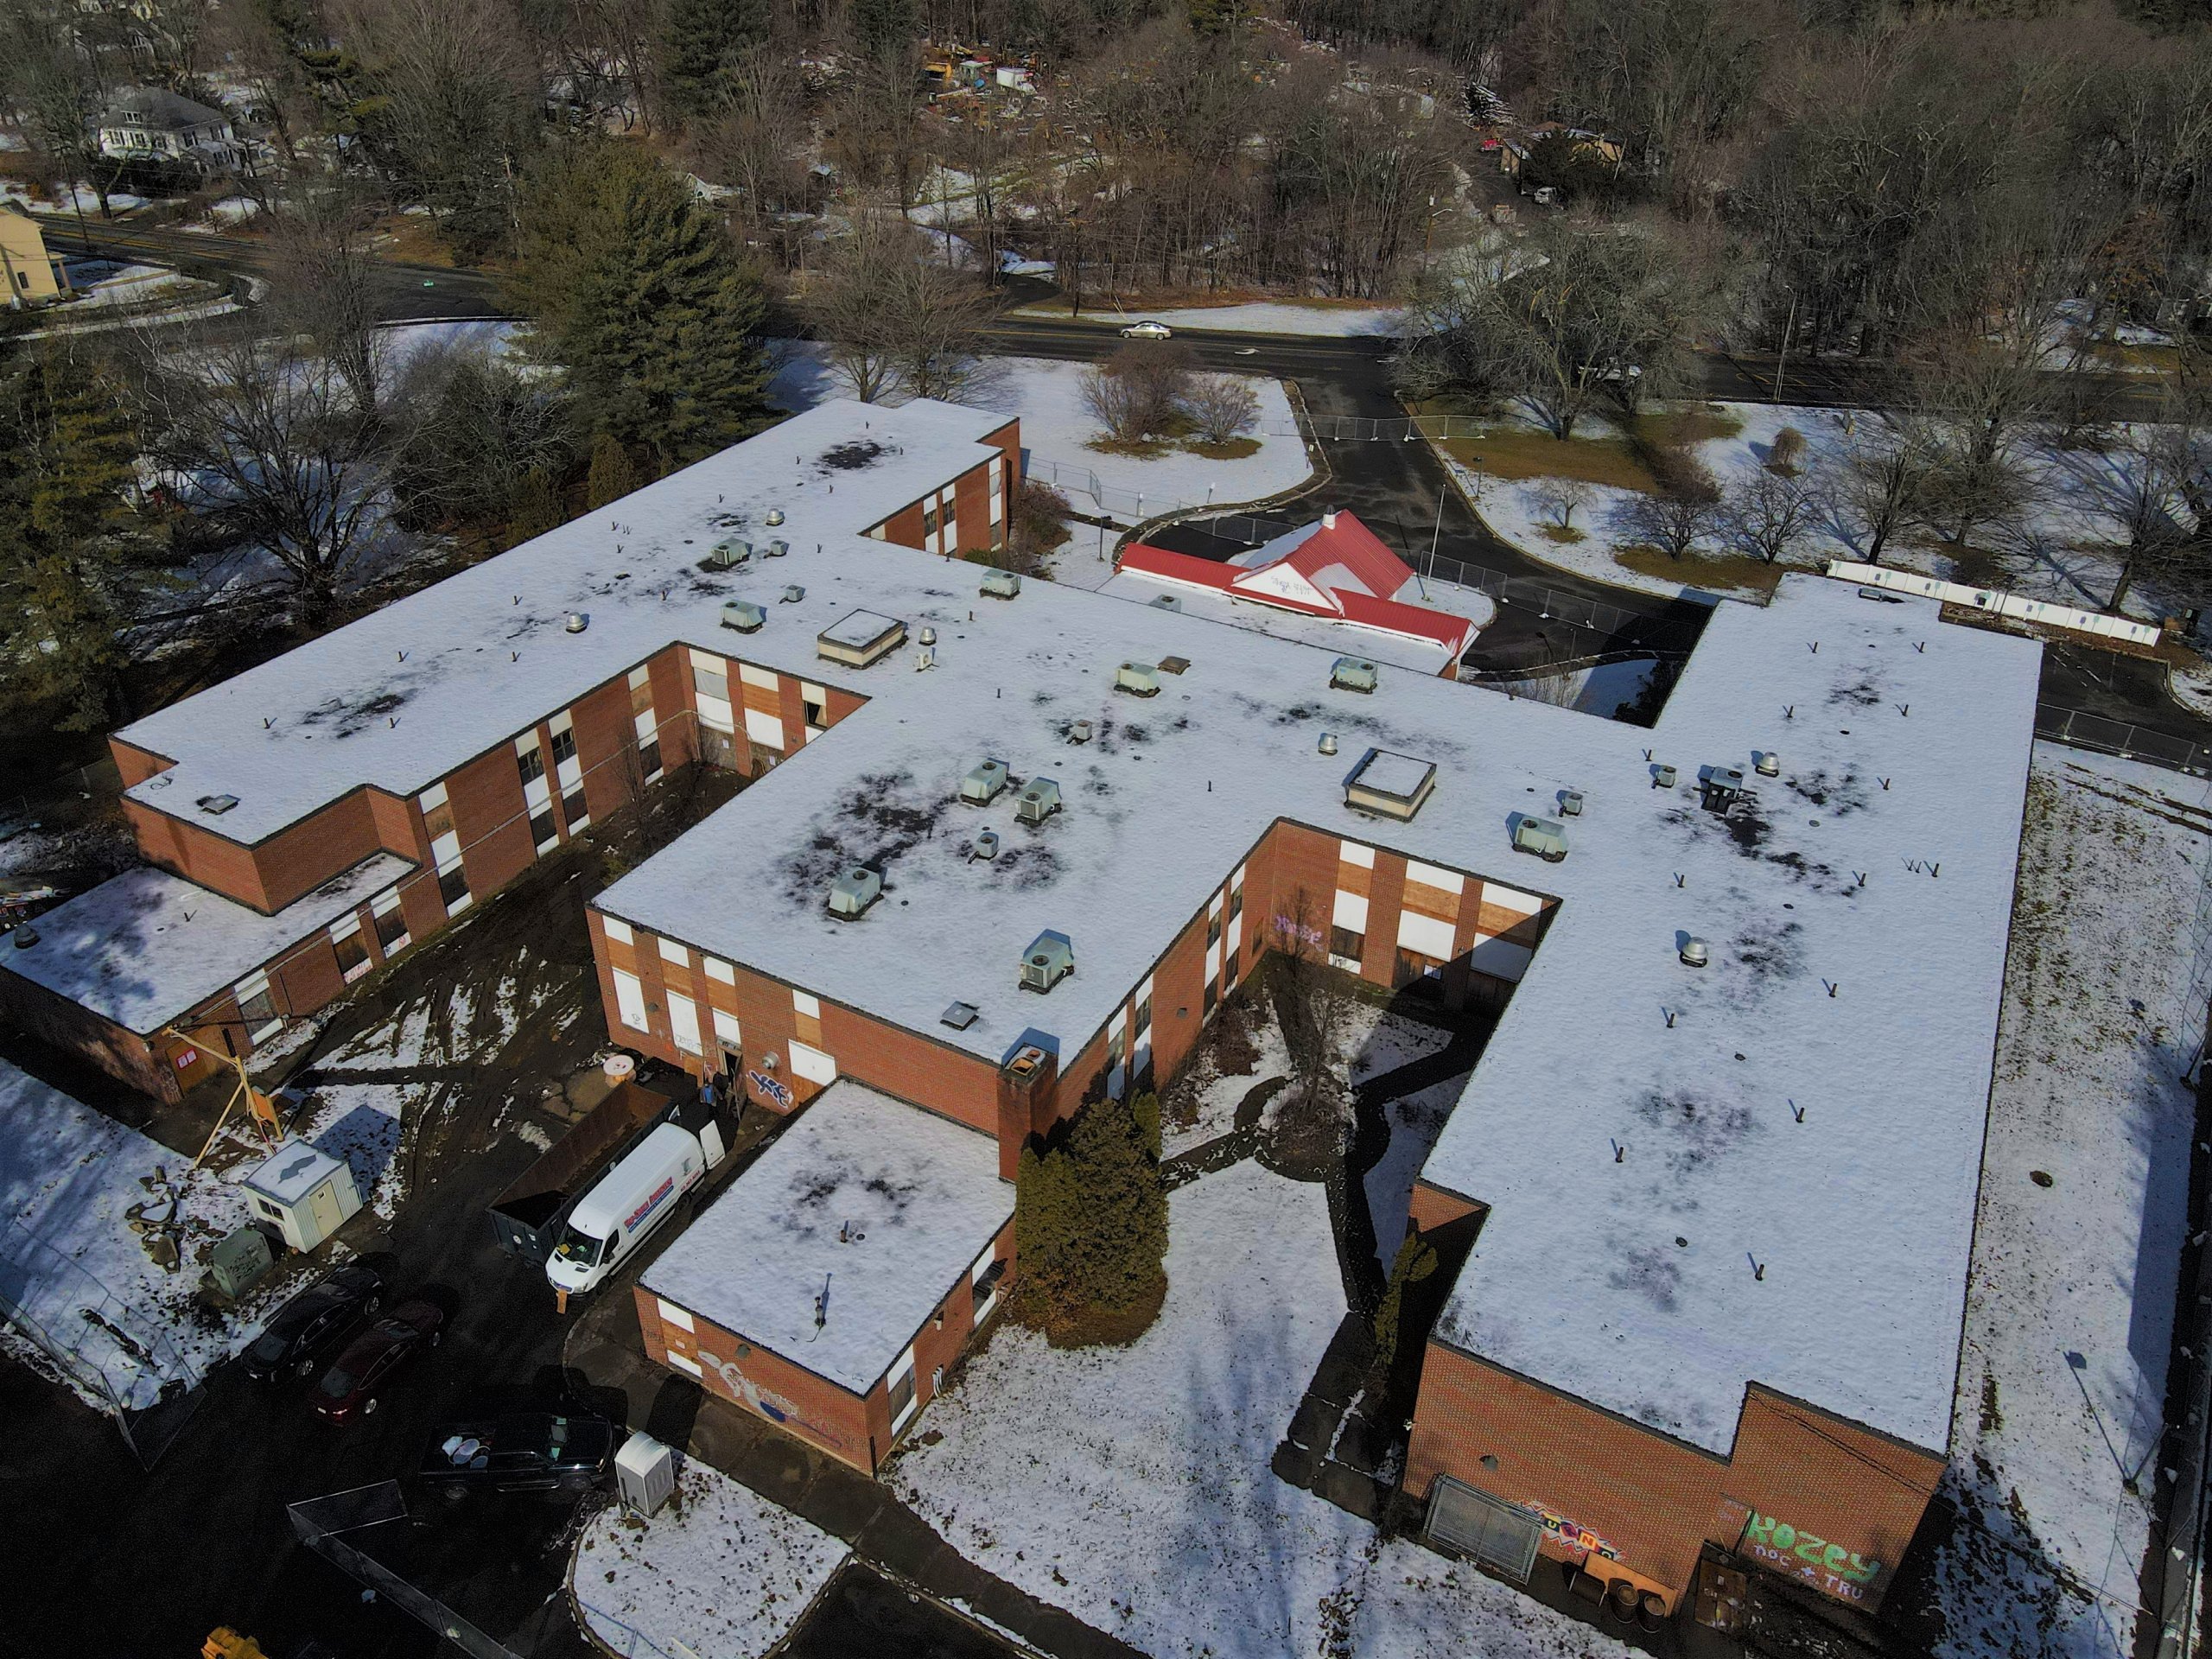 A photo of the old Northampton Nursing Home's rear from an aerial perspective.